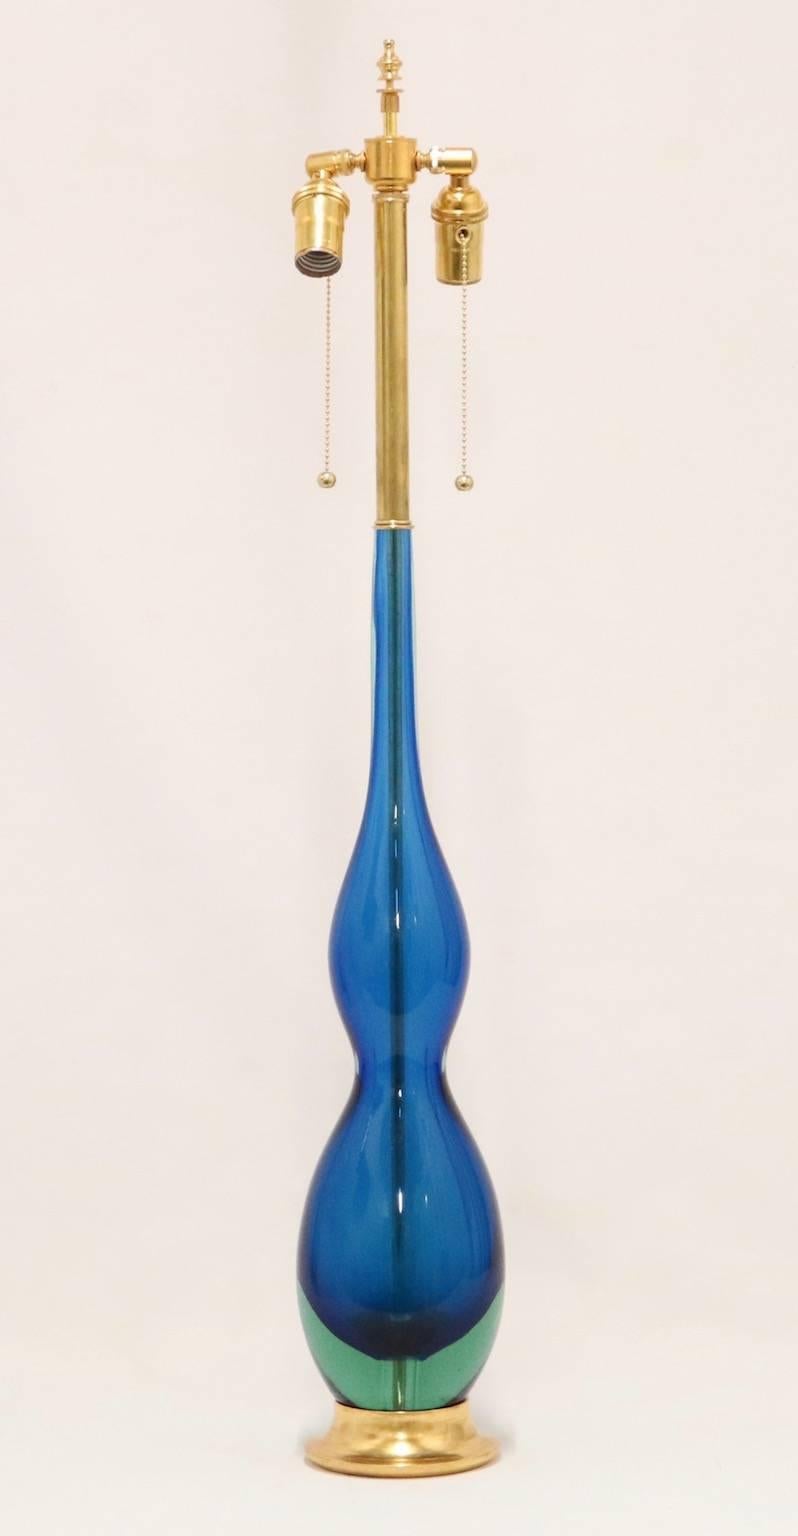 Mid-century modern Murano glass lamp by Flavio Poli for Seguso using Sommerso technique. Alexandrite has been applied to the glass to make it change color from green to purple in reaction to changes in light. The lamp has been mounted in a gilded